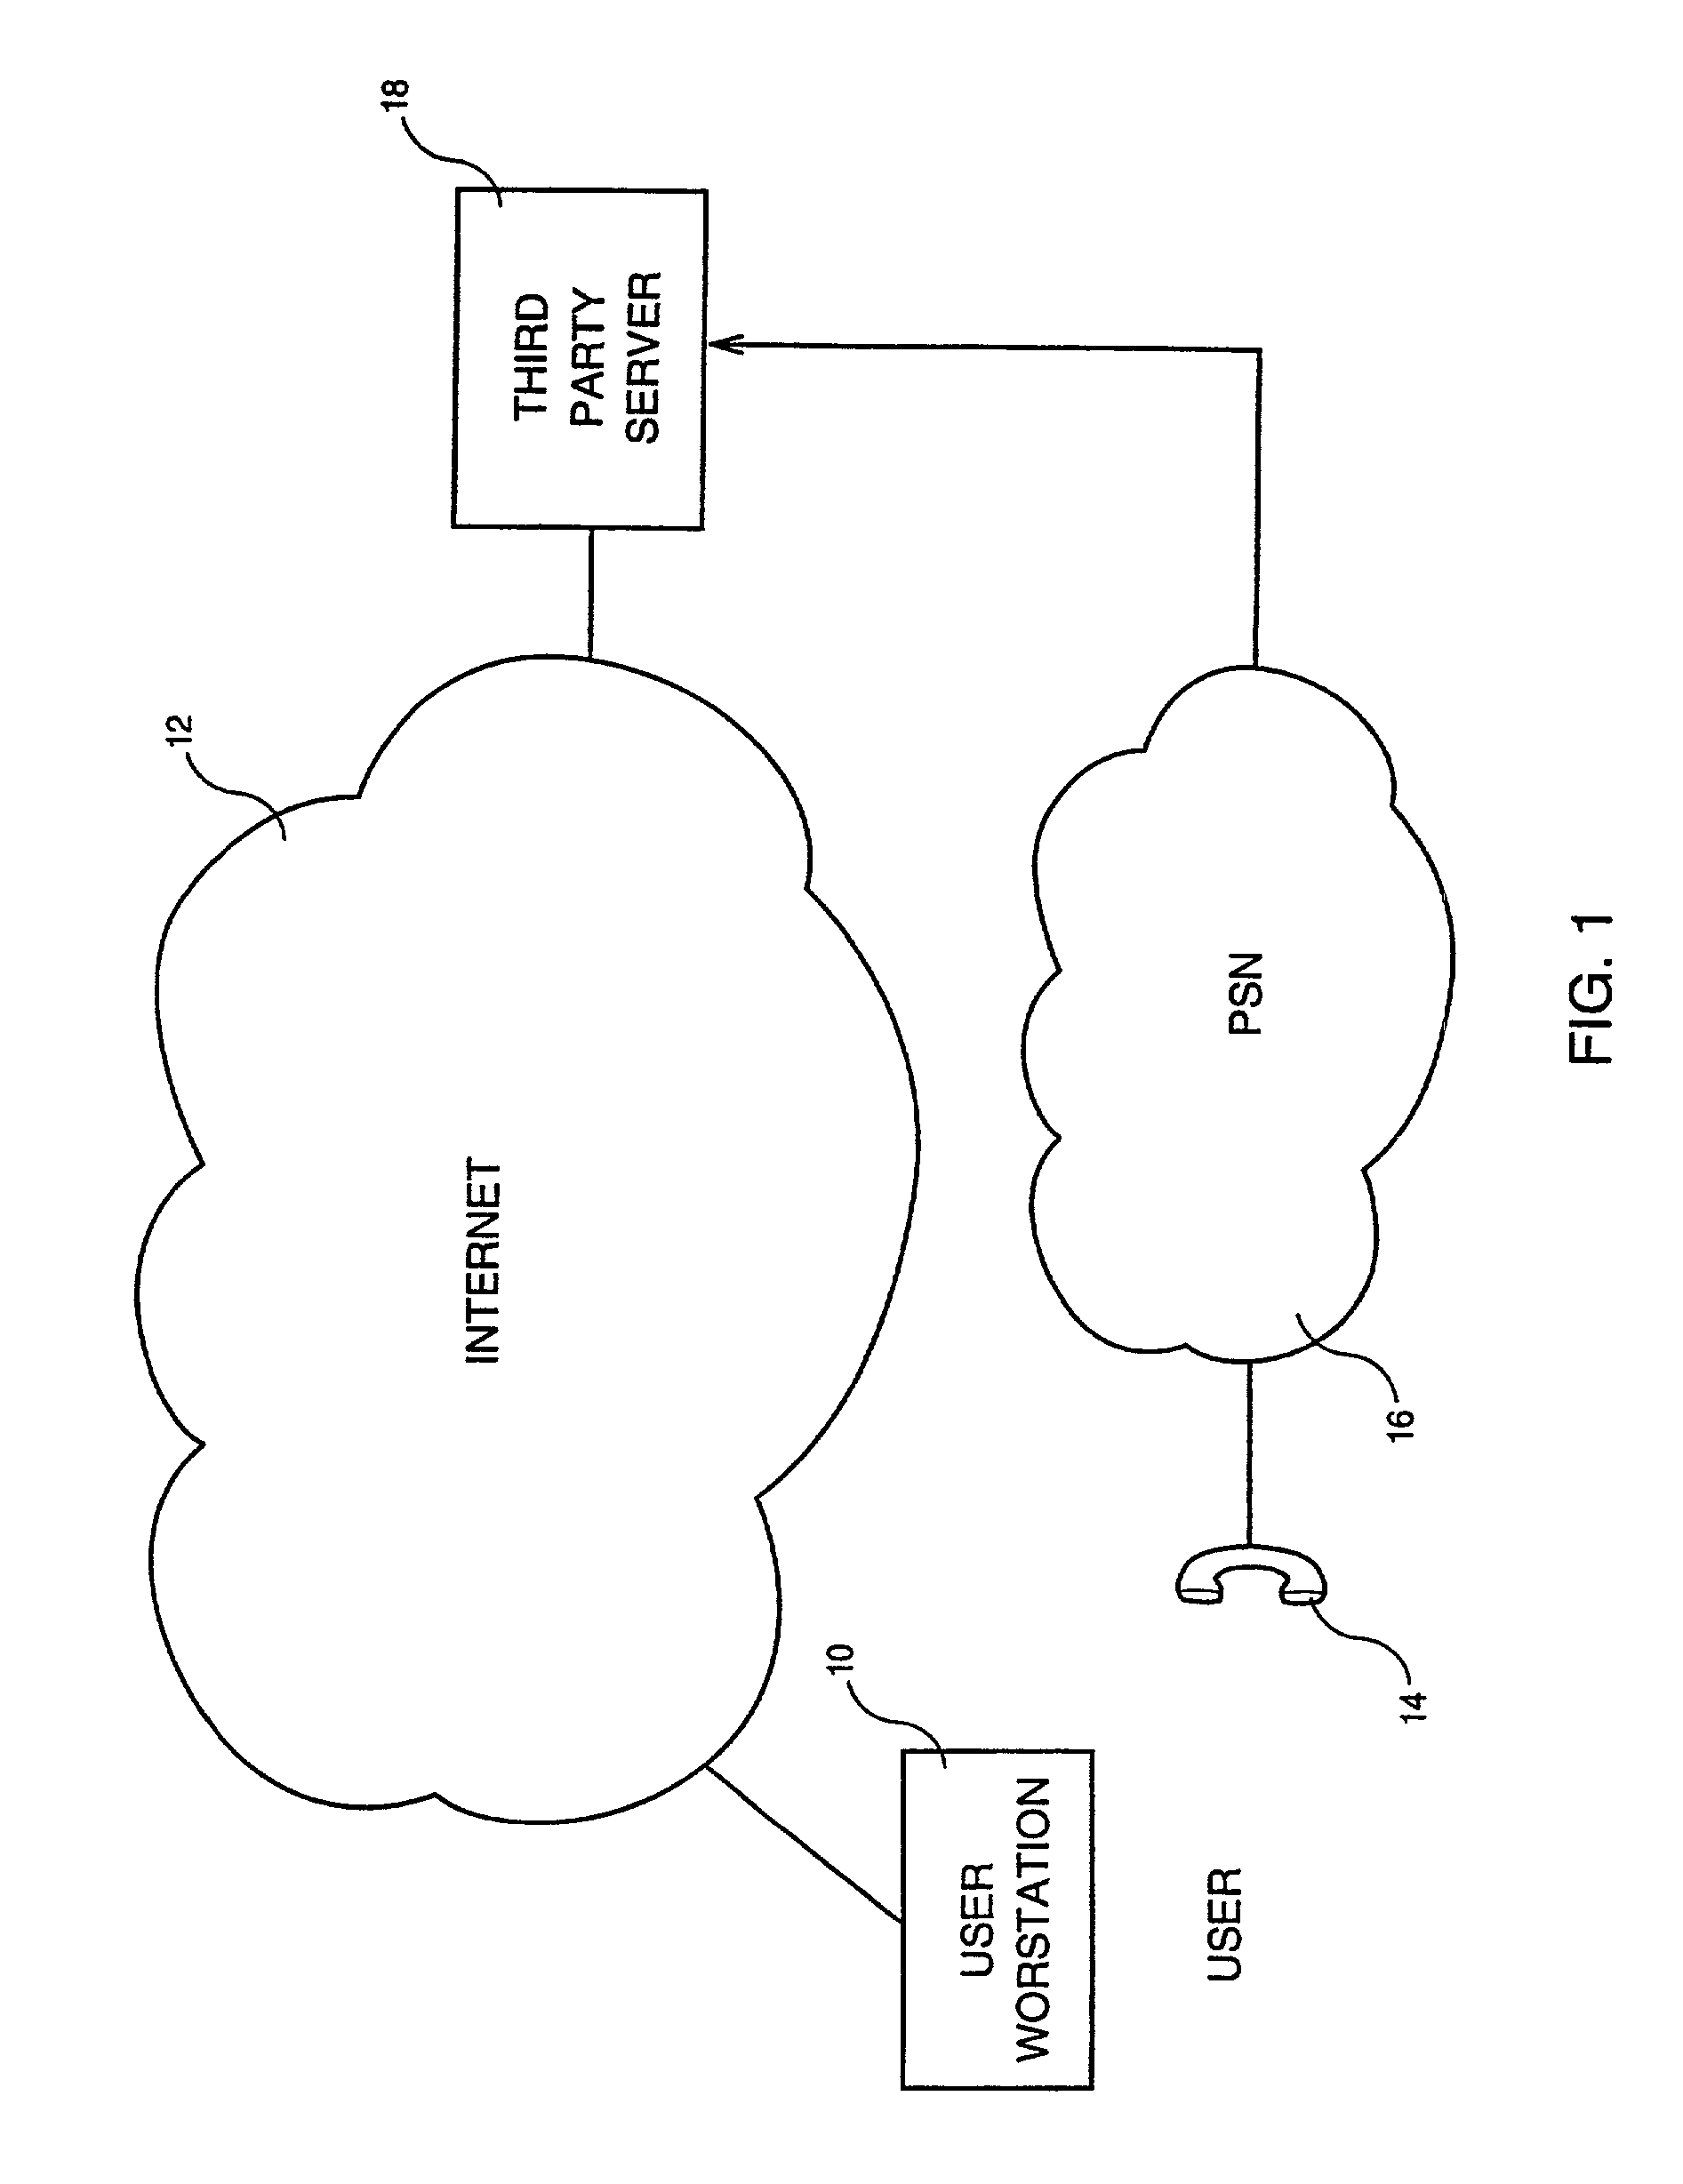 Associating multi-lingual audio recordings with objects in Internet presentation